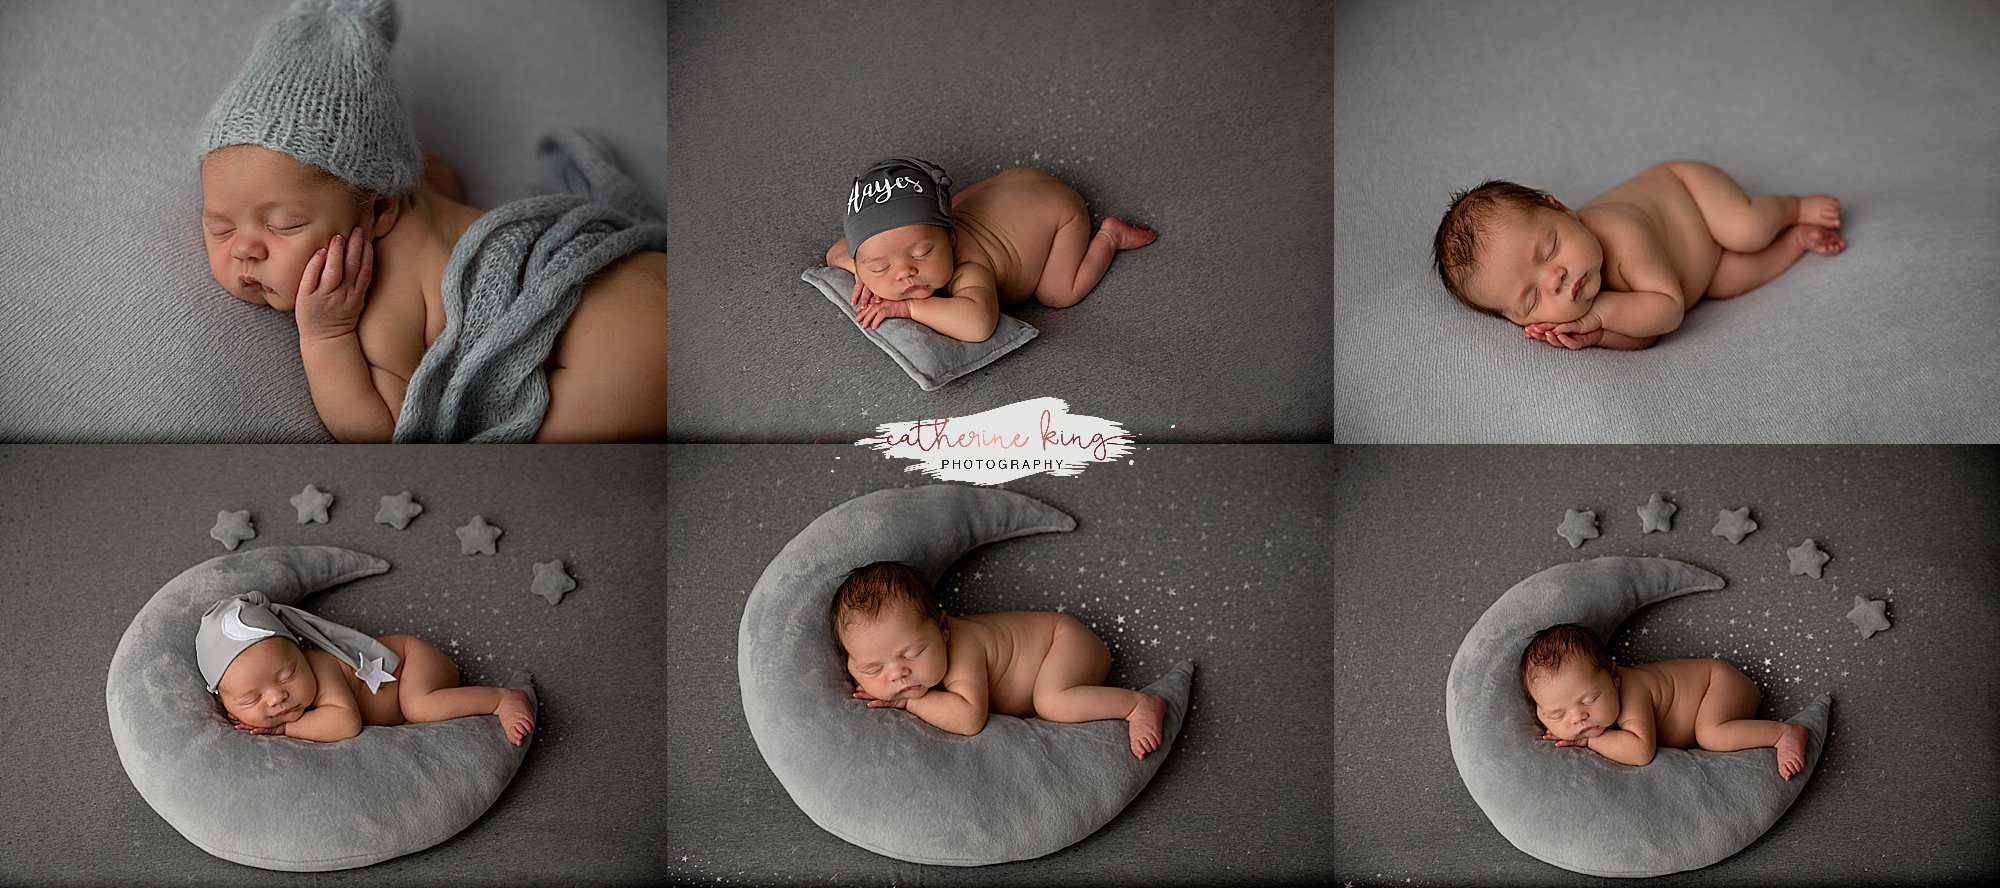 Newborn Photography in Connecticut: Capturing the Precious First Moments